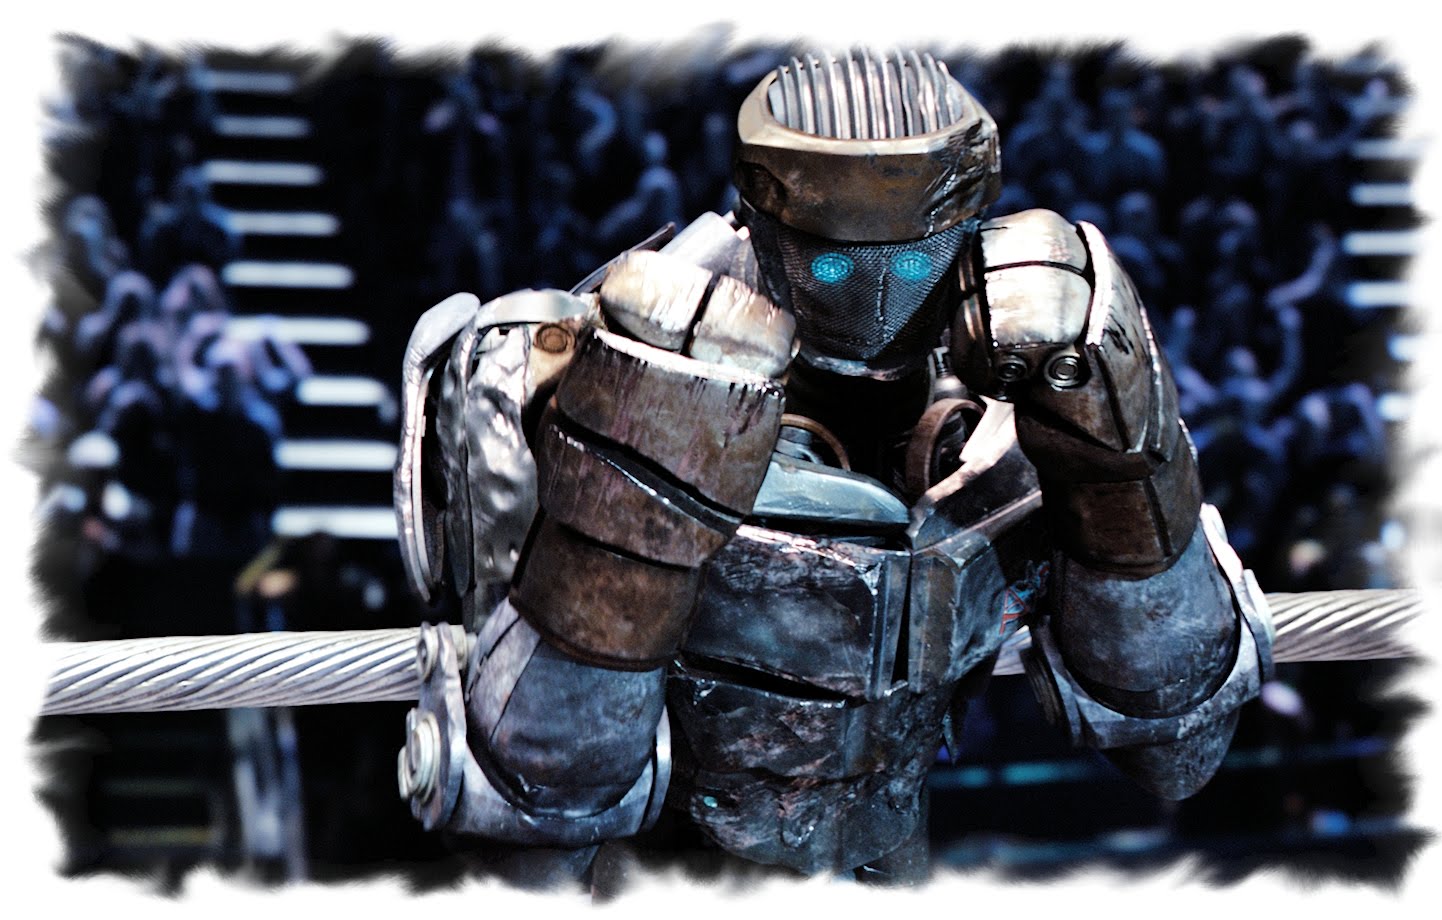 Amazing Real Steel Pictures & Backgrounds